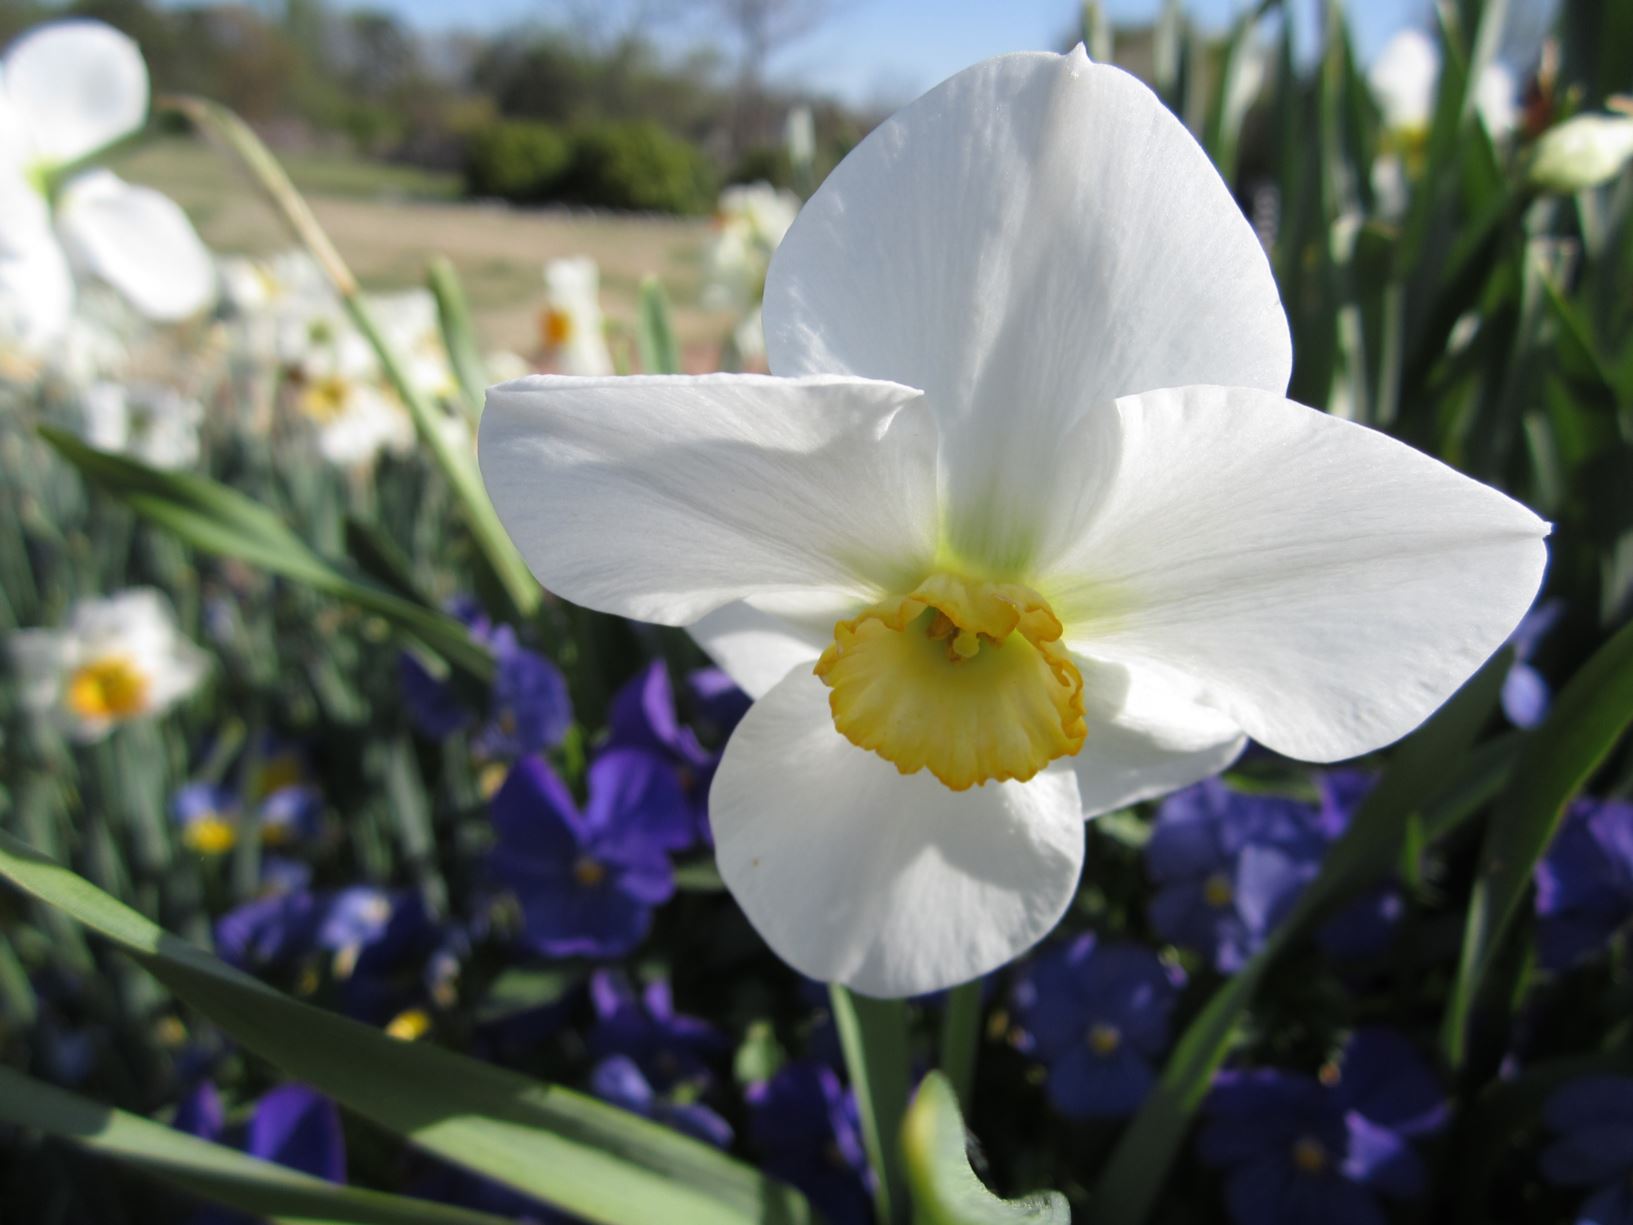 Narcissus 'Fragrant Rose' - large-cupped daffodil